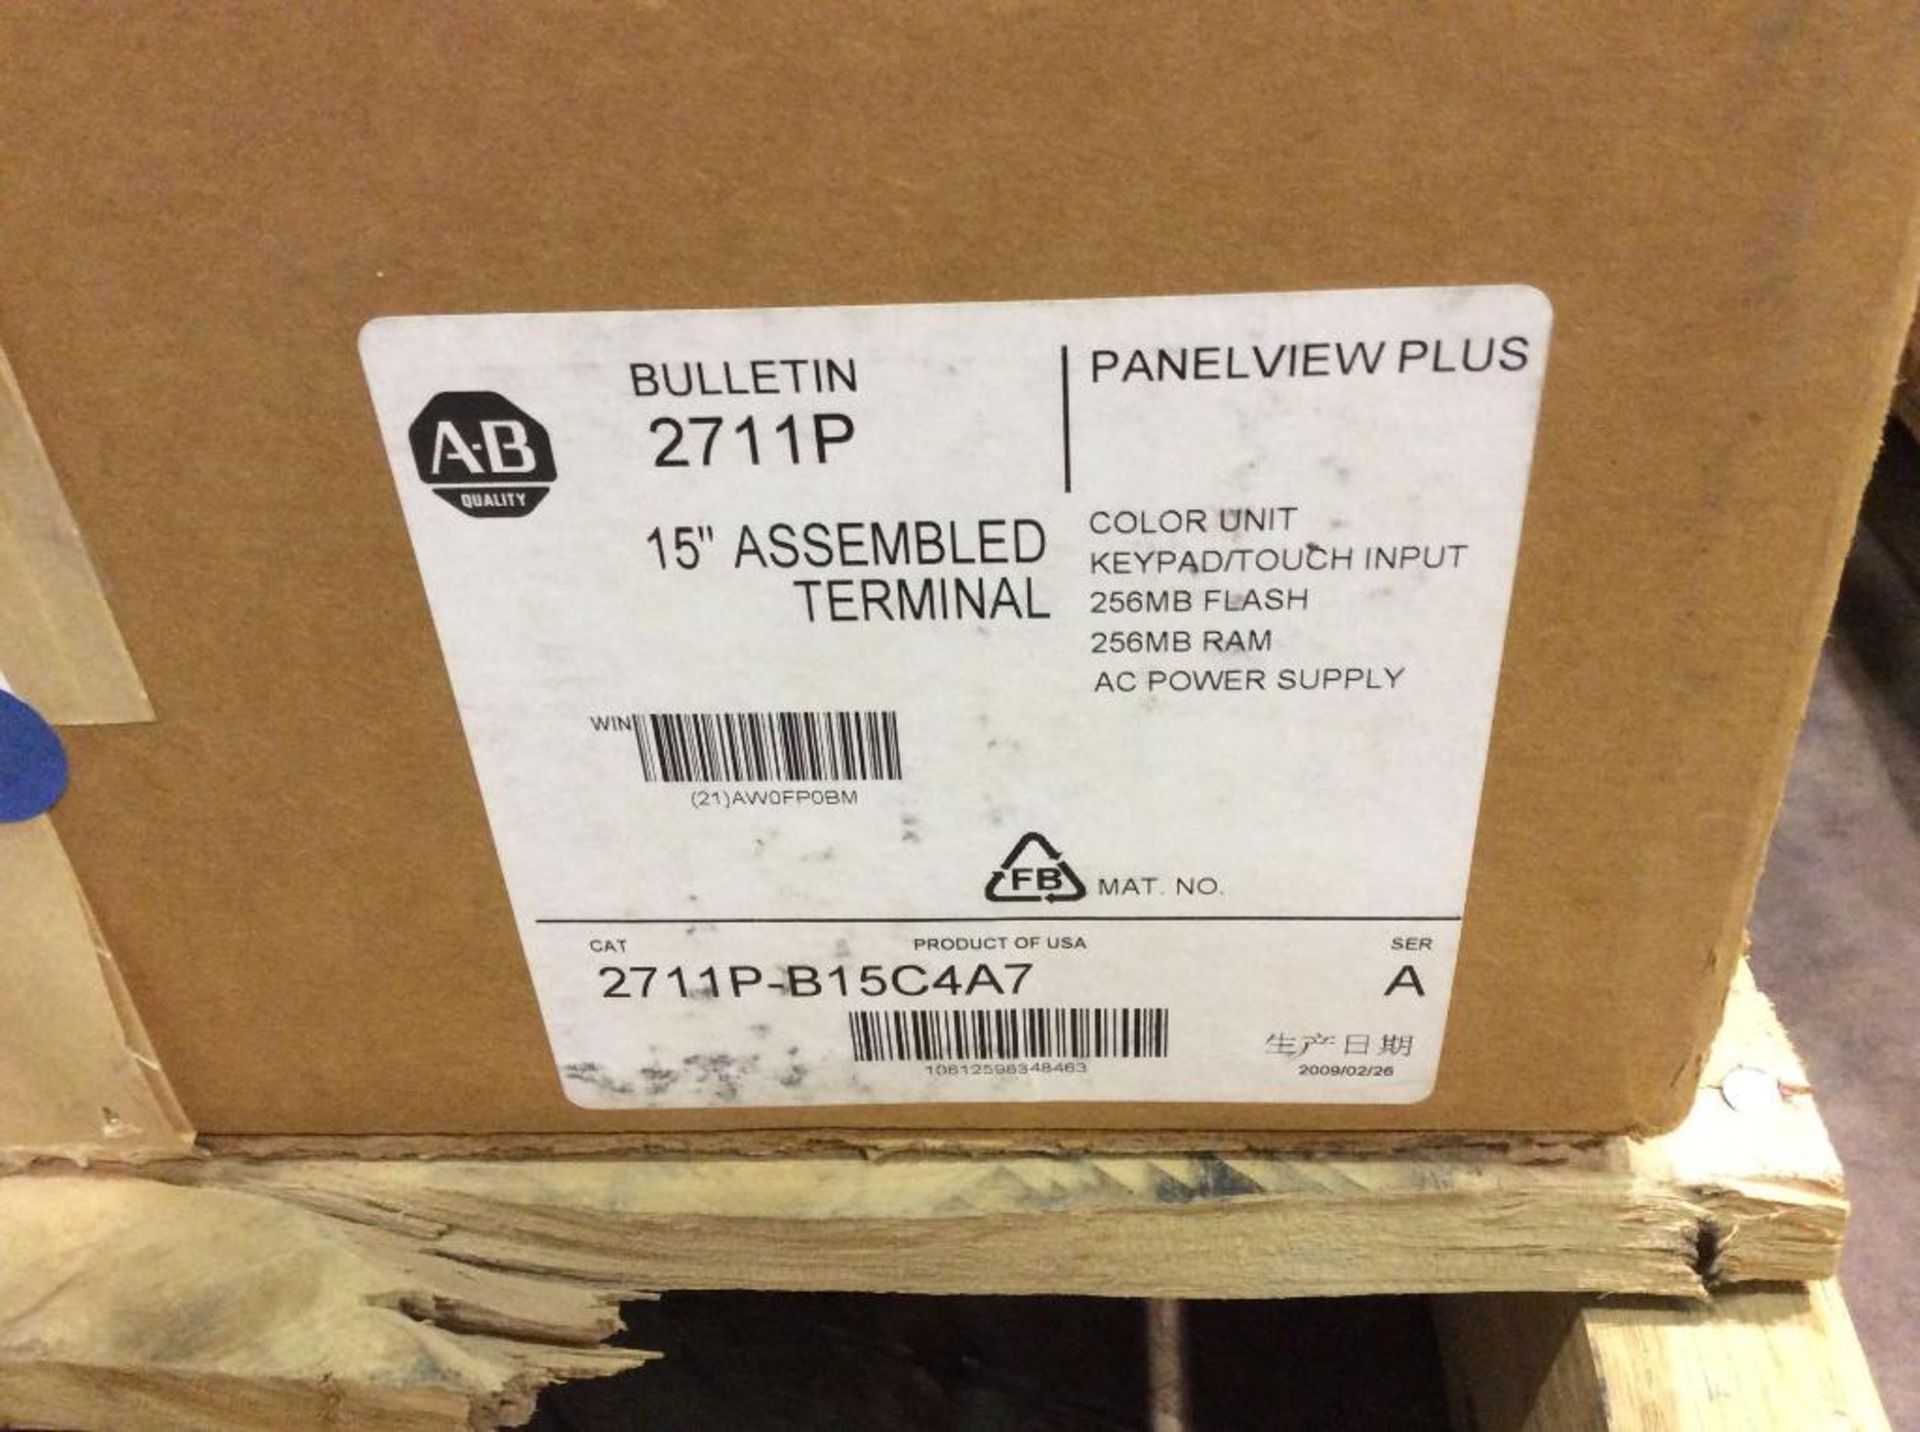 Allen Bradley Panel View 15" assembled terminal, PANELVIEW PLUS 1500, mn 2711P-B15C4A7 (NEW) - Image 3 of 3